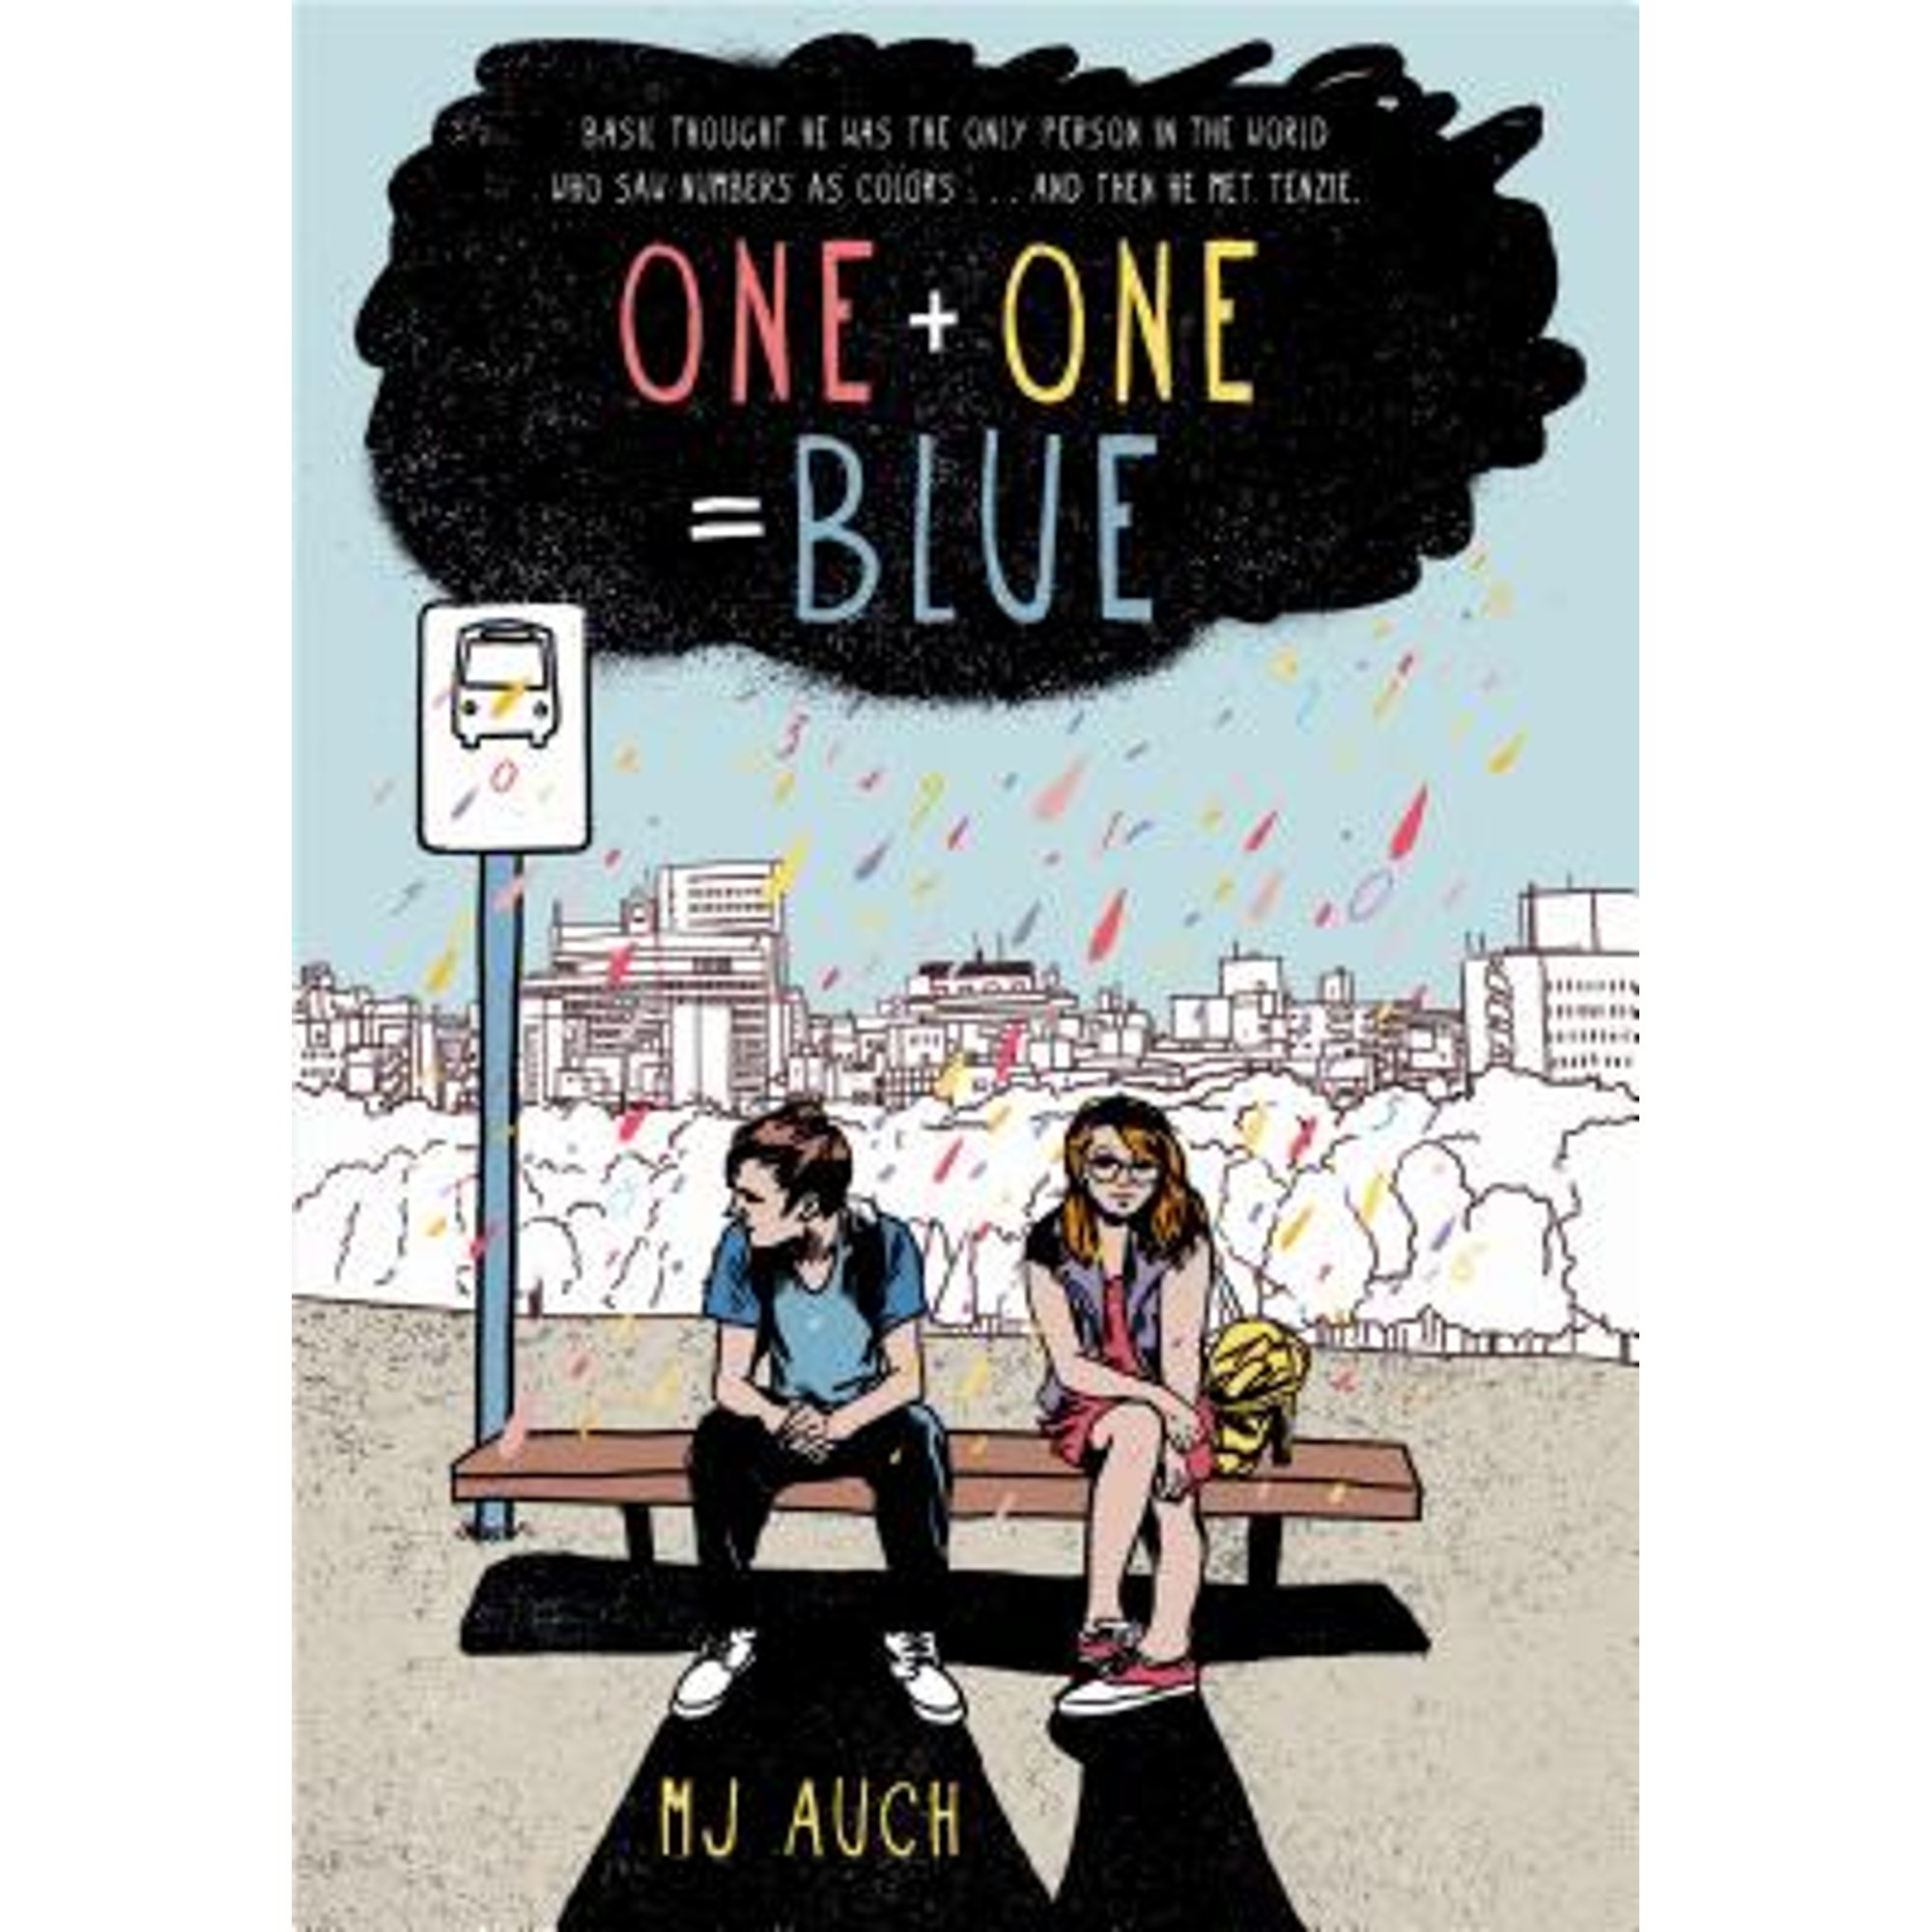 One Plus One Equals Blue (Paperback) by Mj Auch - image 1 of 1